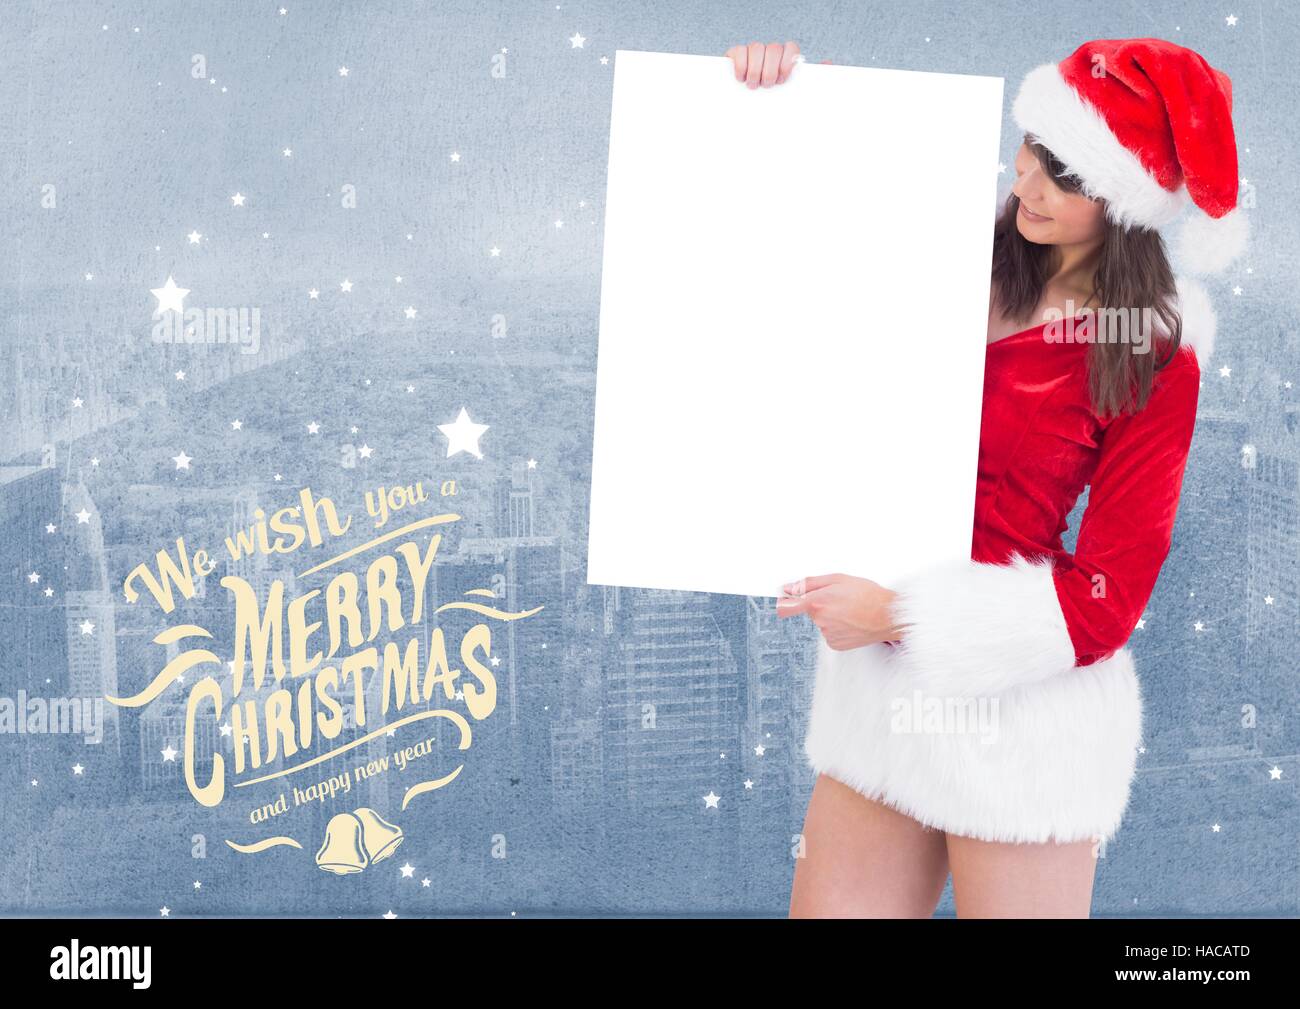 Merry christmas greetings with woman holding blank placard Stock Photo